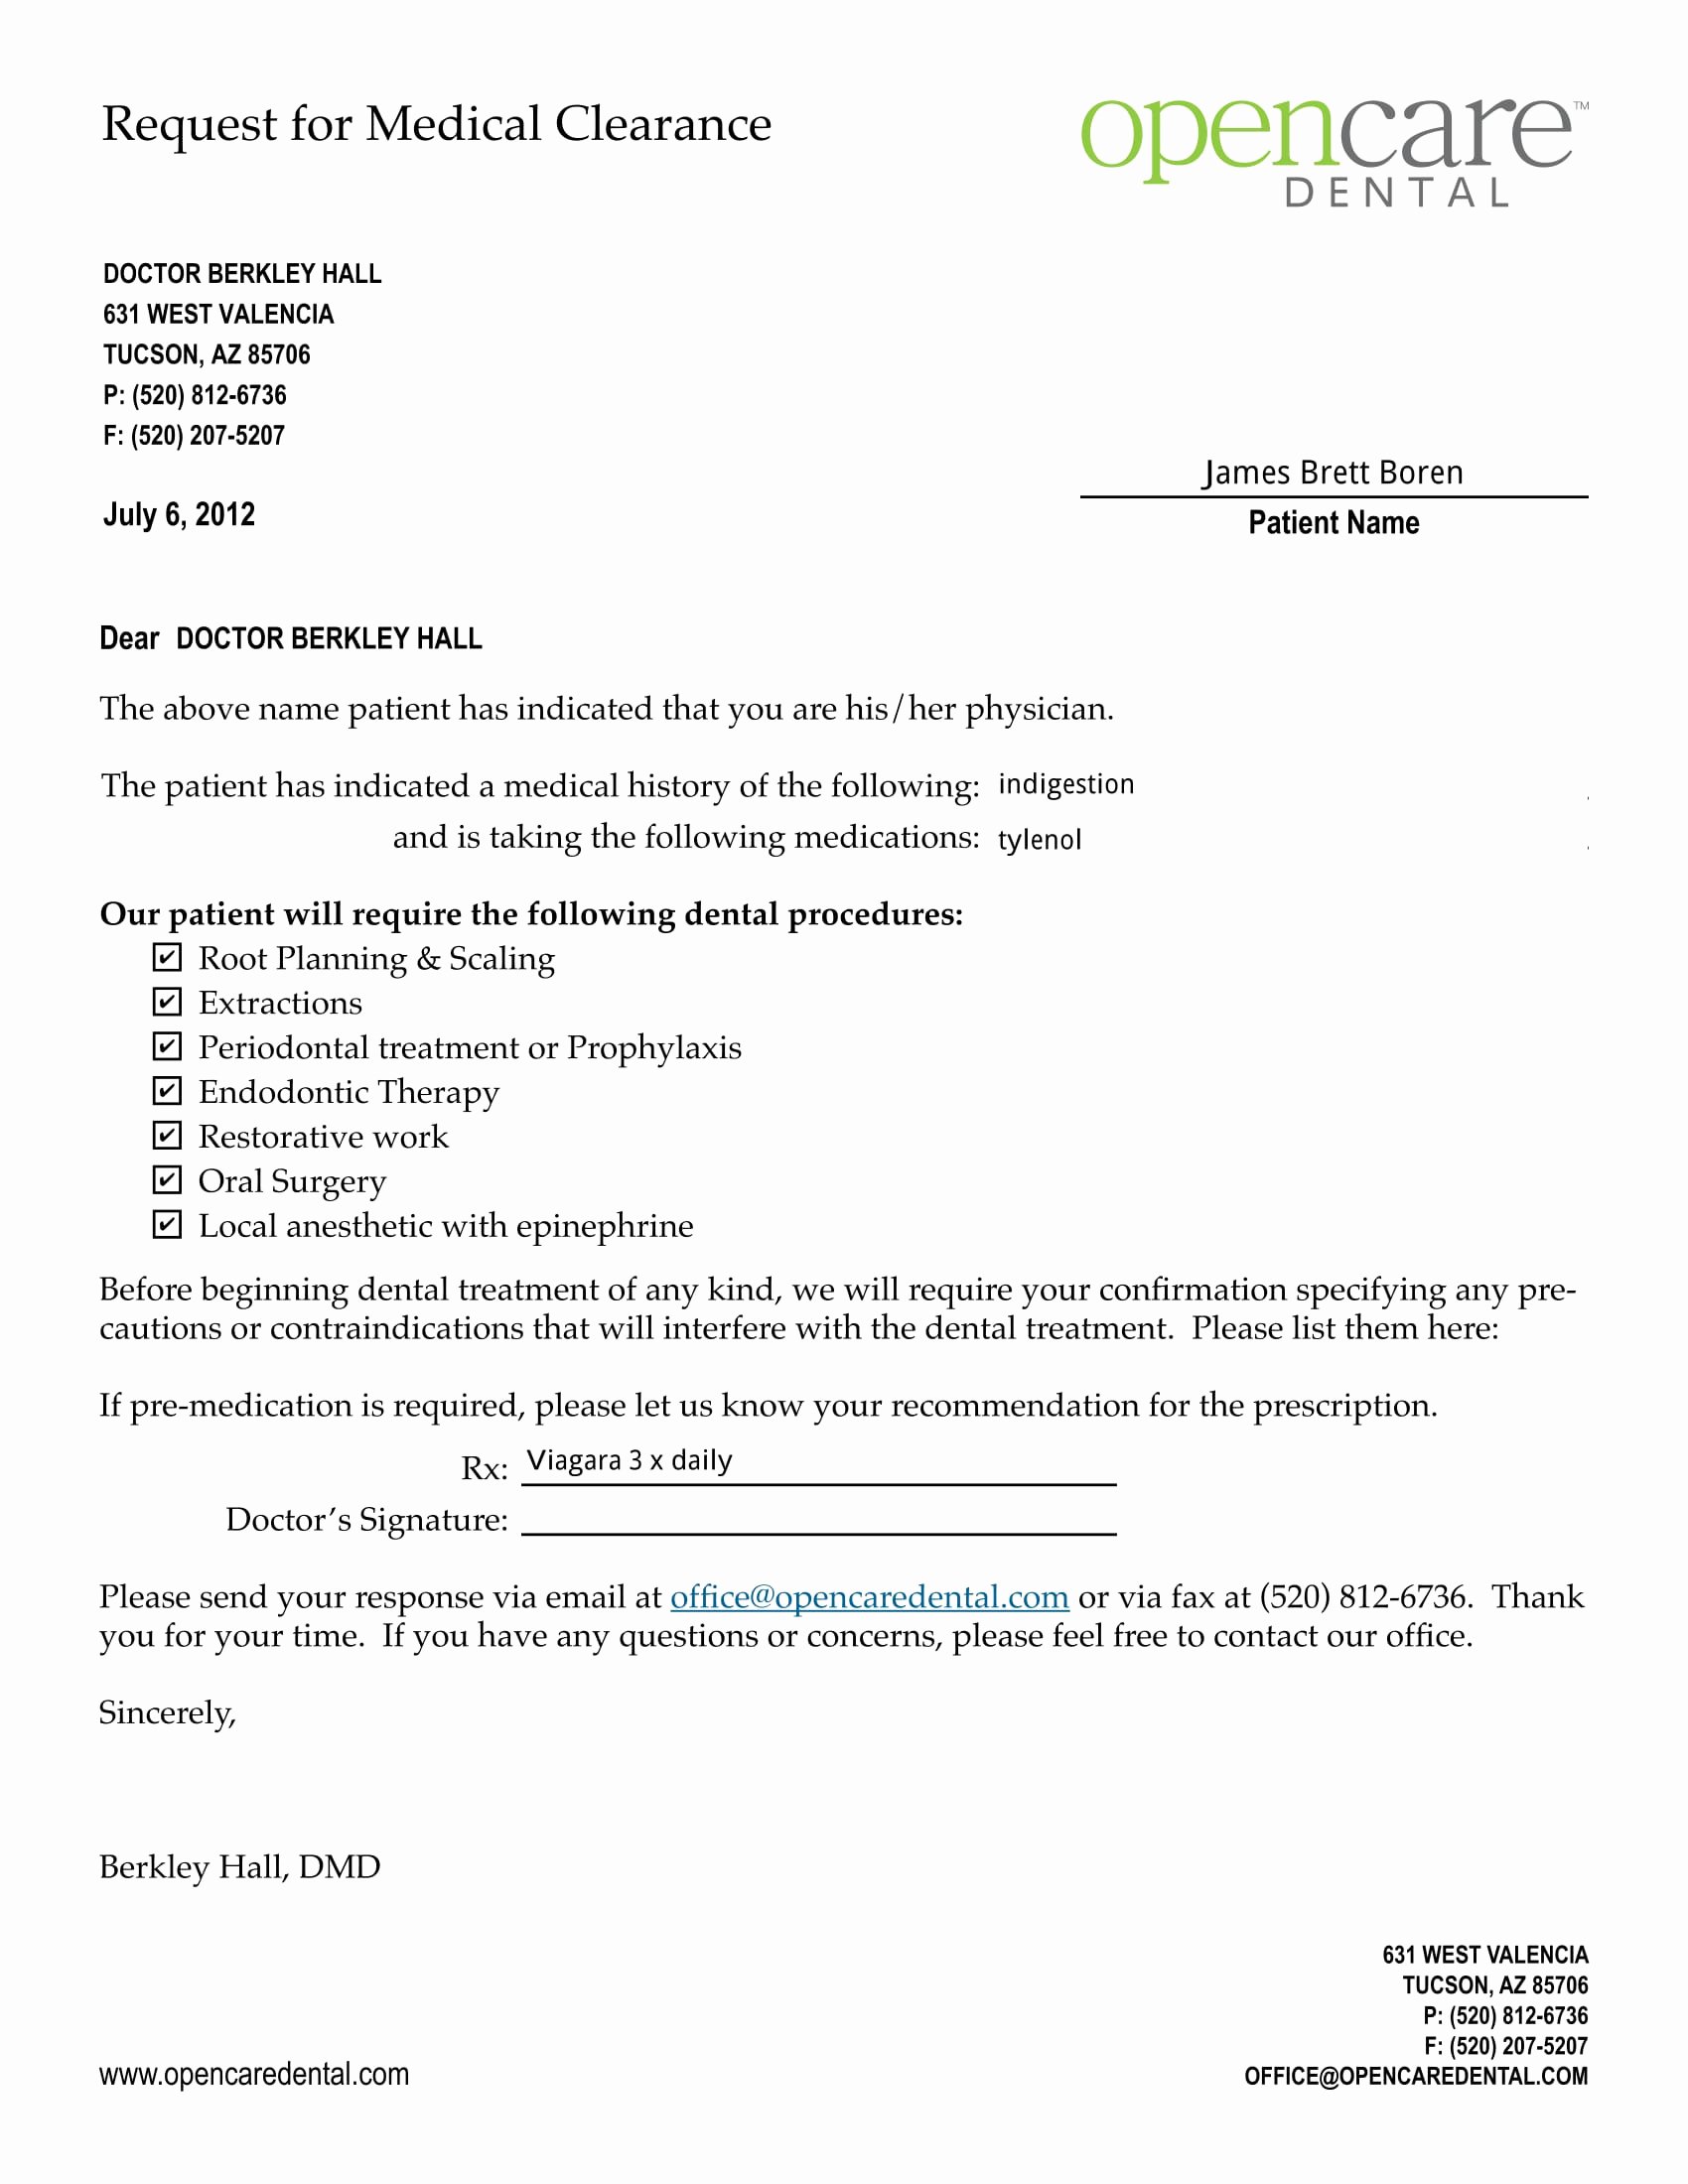 Medical Clearance Letter Template Luxury 14 Dental Medical Clearance forms Free Word Pdf format